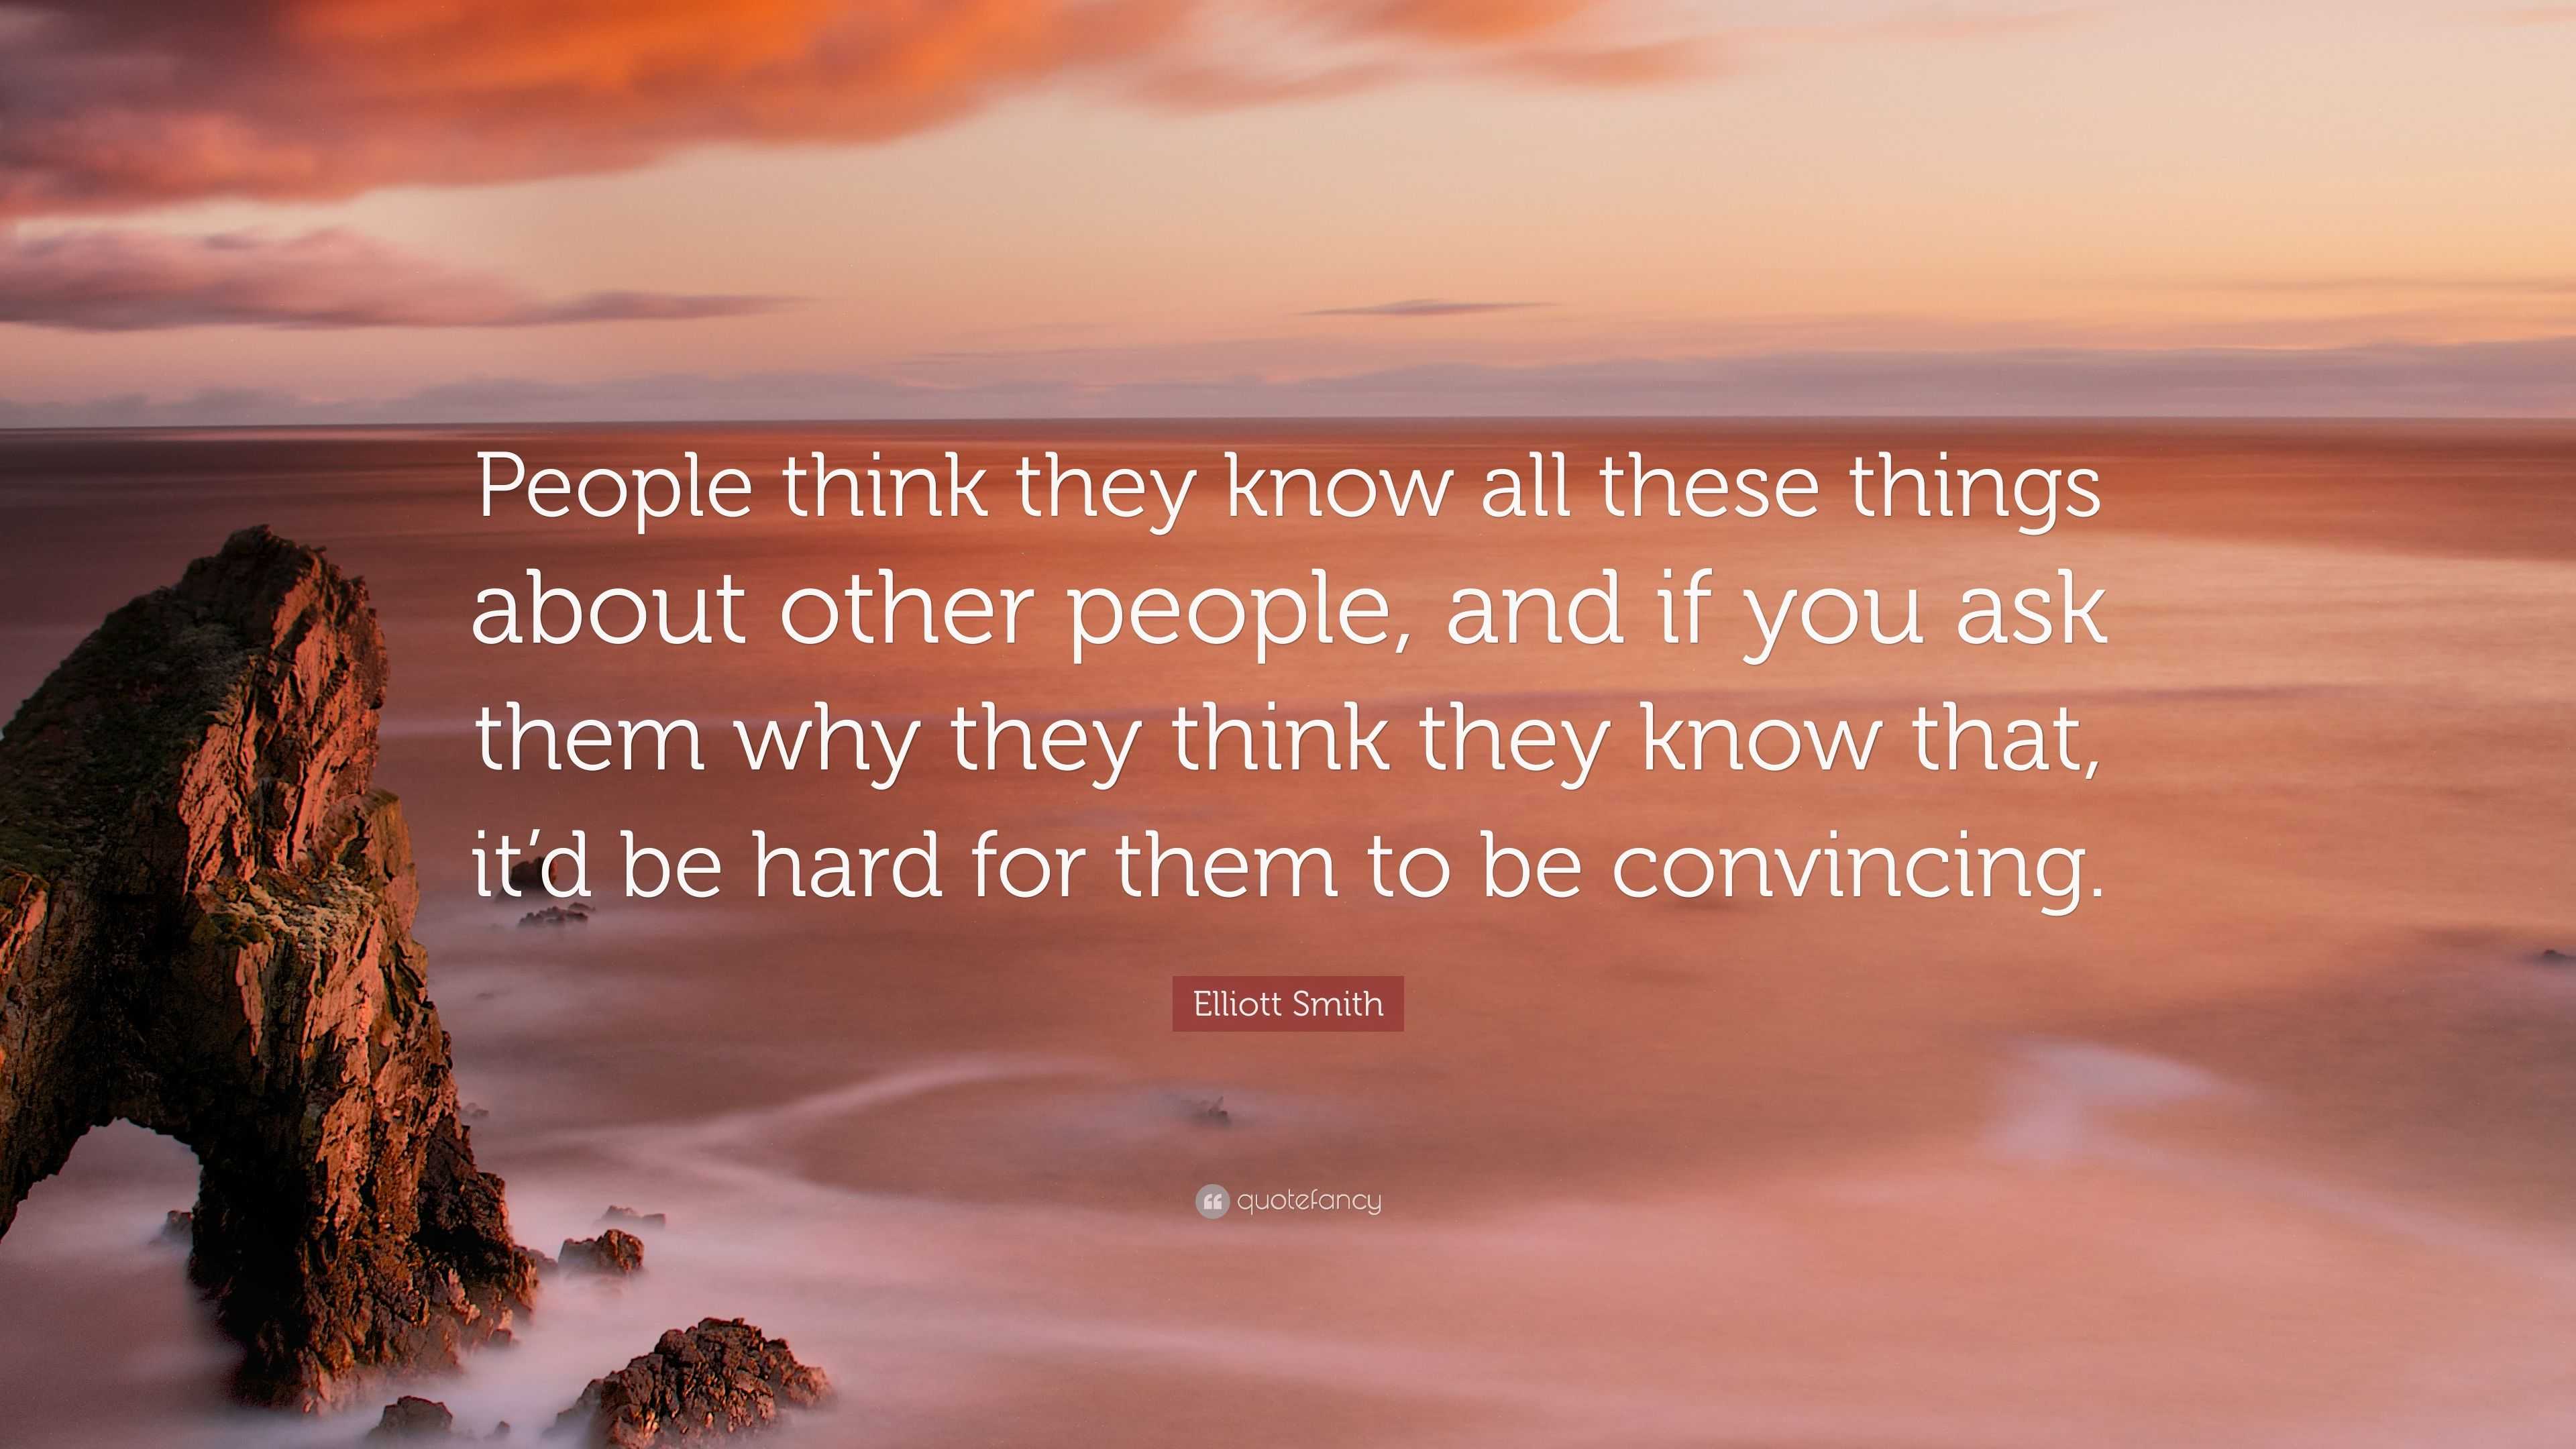 Elliott Smith Quote: “People think they know all these things about ...